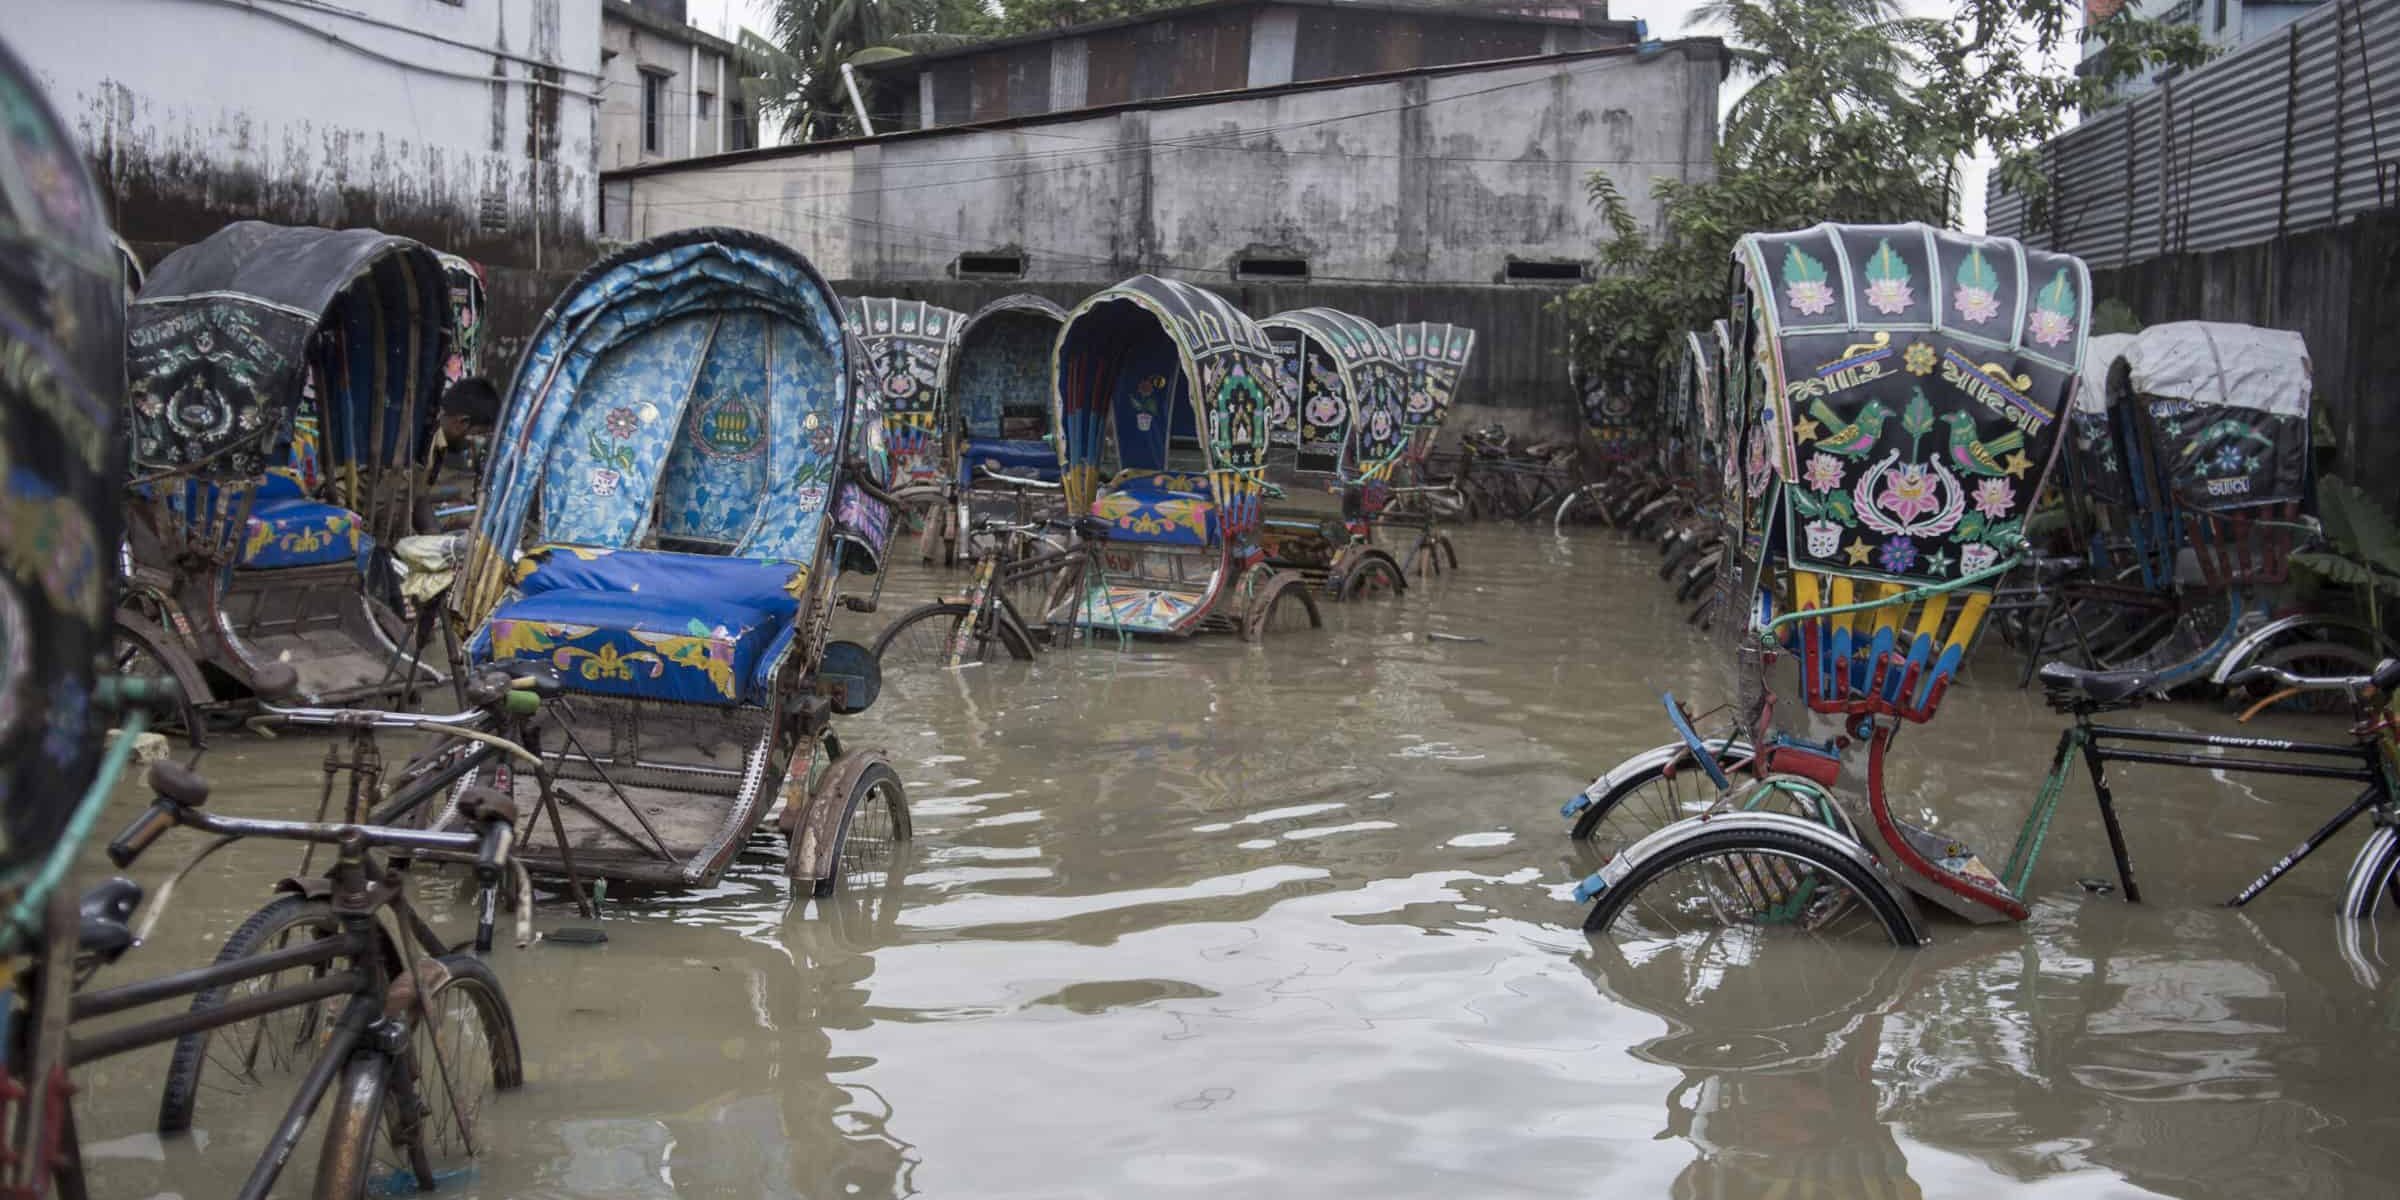 Rickshaws in tidal floodwater, Chaktai, Chittagong.

Global average temperatures have risen by 1°C over the last century, and climate scientists believe that warming could be between 3-5 °C by the end of this century. Our oceans absorb around 90% of that heat. But warmer water expands, and this, along with water being released from melting polar ice, is causing global sea levels to rise.

Considering present warming trends, a 2013 World Bank paper  suggests that Bangladesh will be hit by increasing river floods, more intense tropical cyclones, very high temperatures, and rising sea-levels (a 27 cm sea level rise is projected by the 2040s). This could leave some areas completely submerged, as well as affecting power, food and health. 

Chittagong is the second-largest city in Bangladesh, densely populated with over 4 million people . It’s often regarded as the commercial capital of Bangladesh , with its port handling over 90% of the country's foreign trade . 

Quote from Jashim Salam, photographer: “In the past few years, climate change has begun to take a major toll on my home city of Chittagong.  
Tidal surges – water levels rising significantly above the predicted tide levels – are affecting the city as often as twice a day, resulting in frequent flooding of homes and businesses. Prior to this, the last tidal surge occurred in 1991, when a hurricane hit the coastal area.
Local people are growing increasingly concerned - we may have to move from our homes due to this excess of water.  The effects of climate change have brought a sudden vulnerability to the lives and livelihoods of people living in Chittagong and the coastal areas of Bangladesh.”